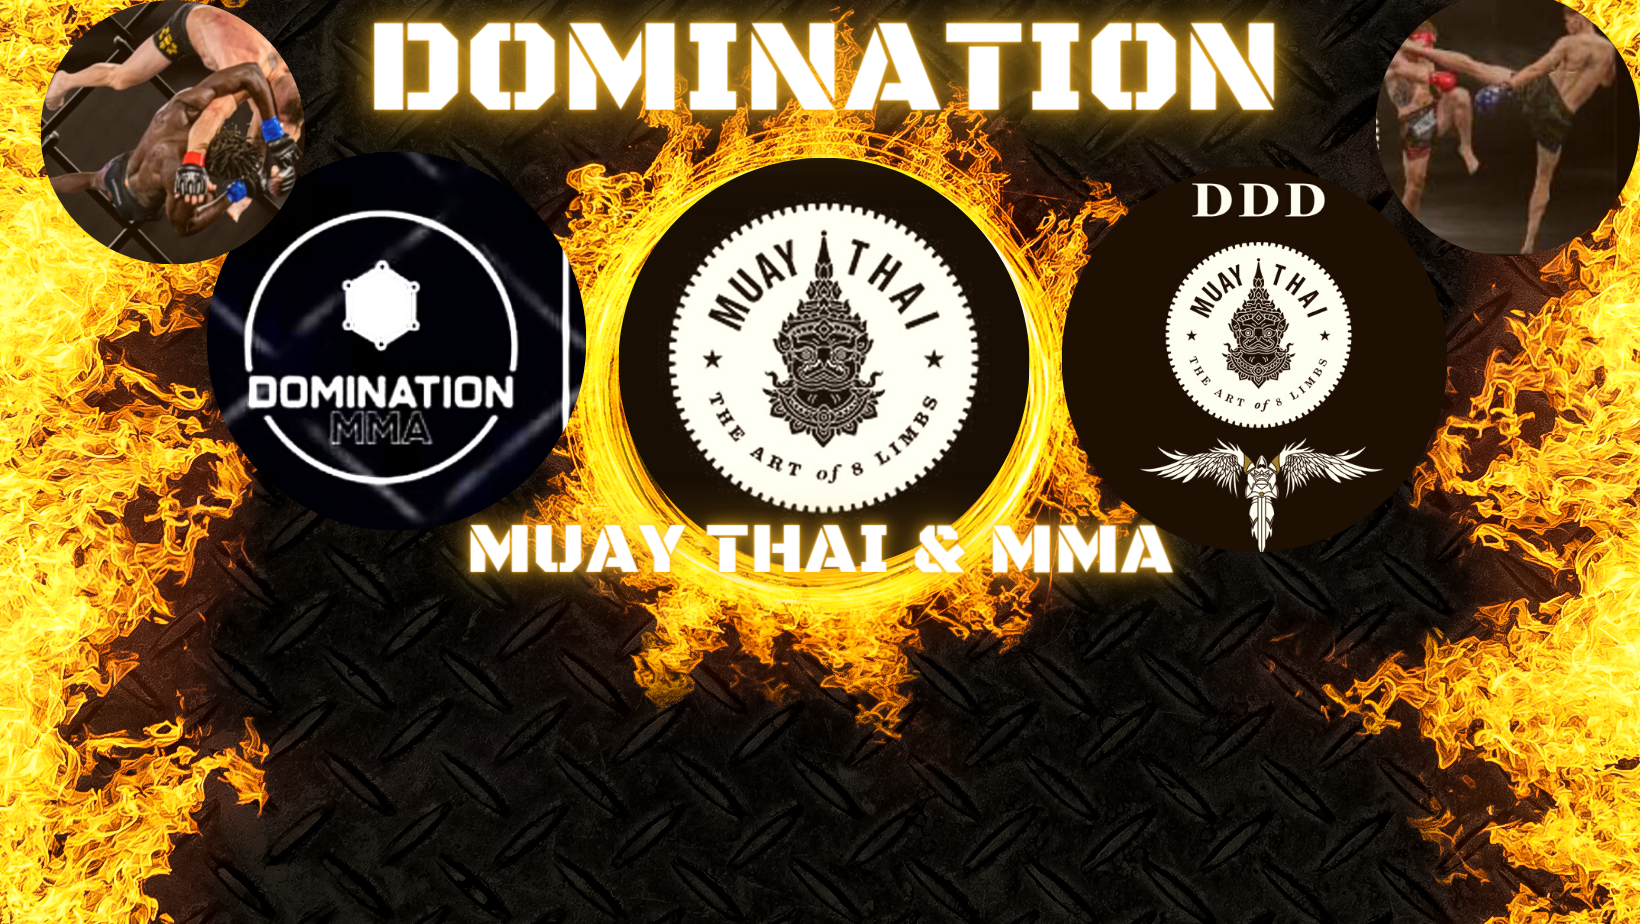 Poster promoting the event Domination - Muay Thai and MMA, with images of athletes fighting